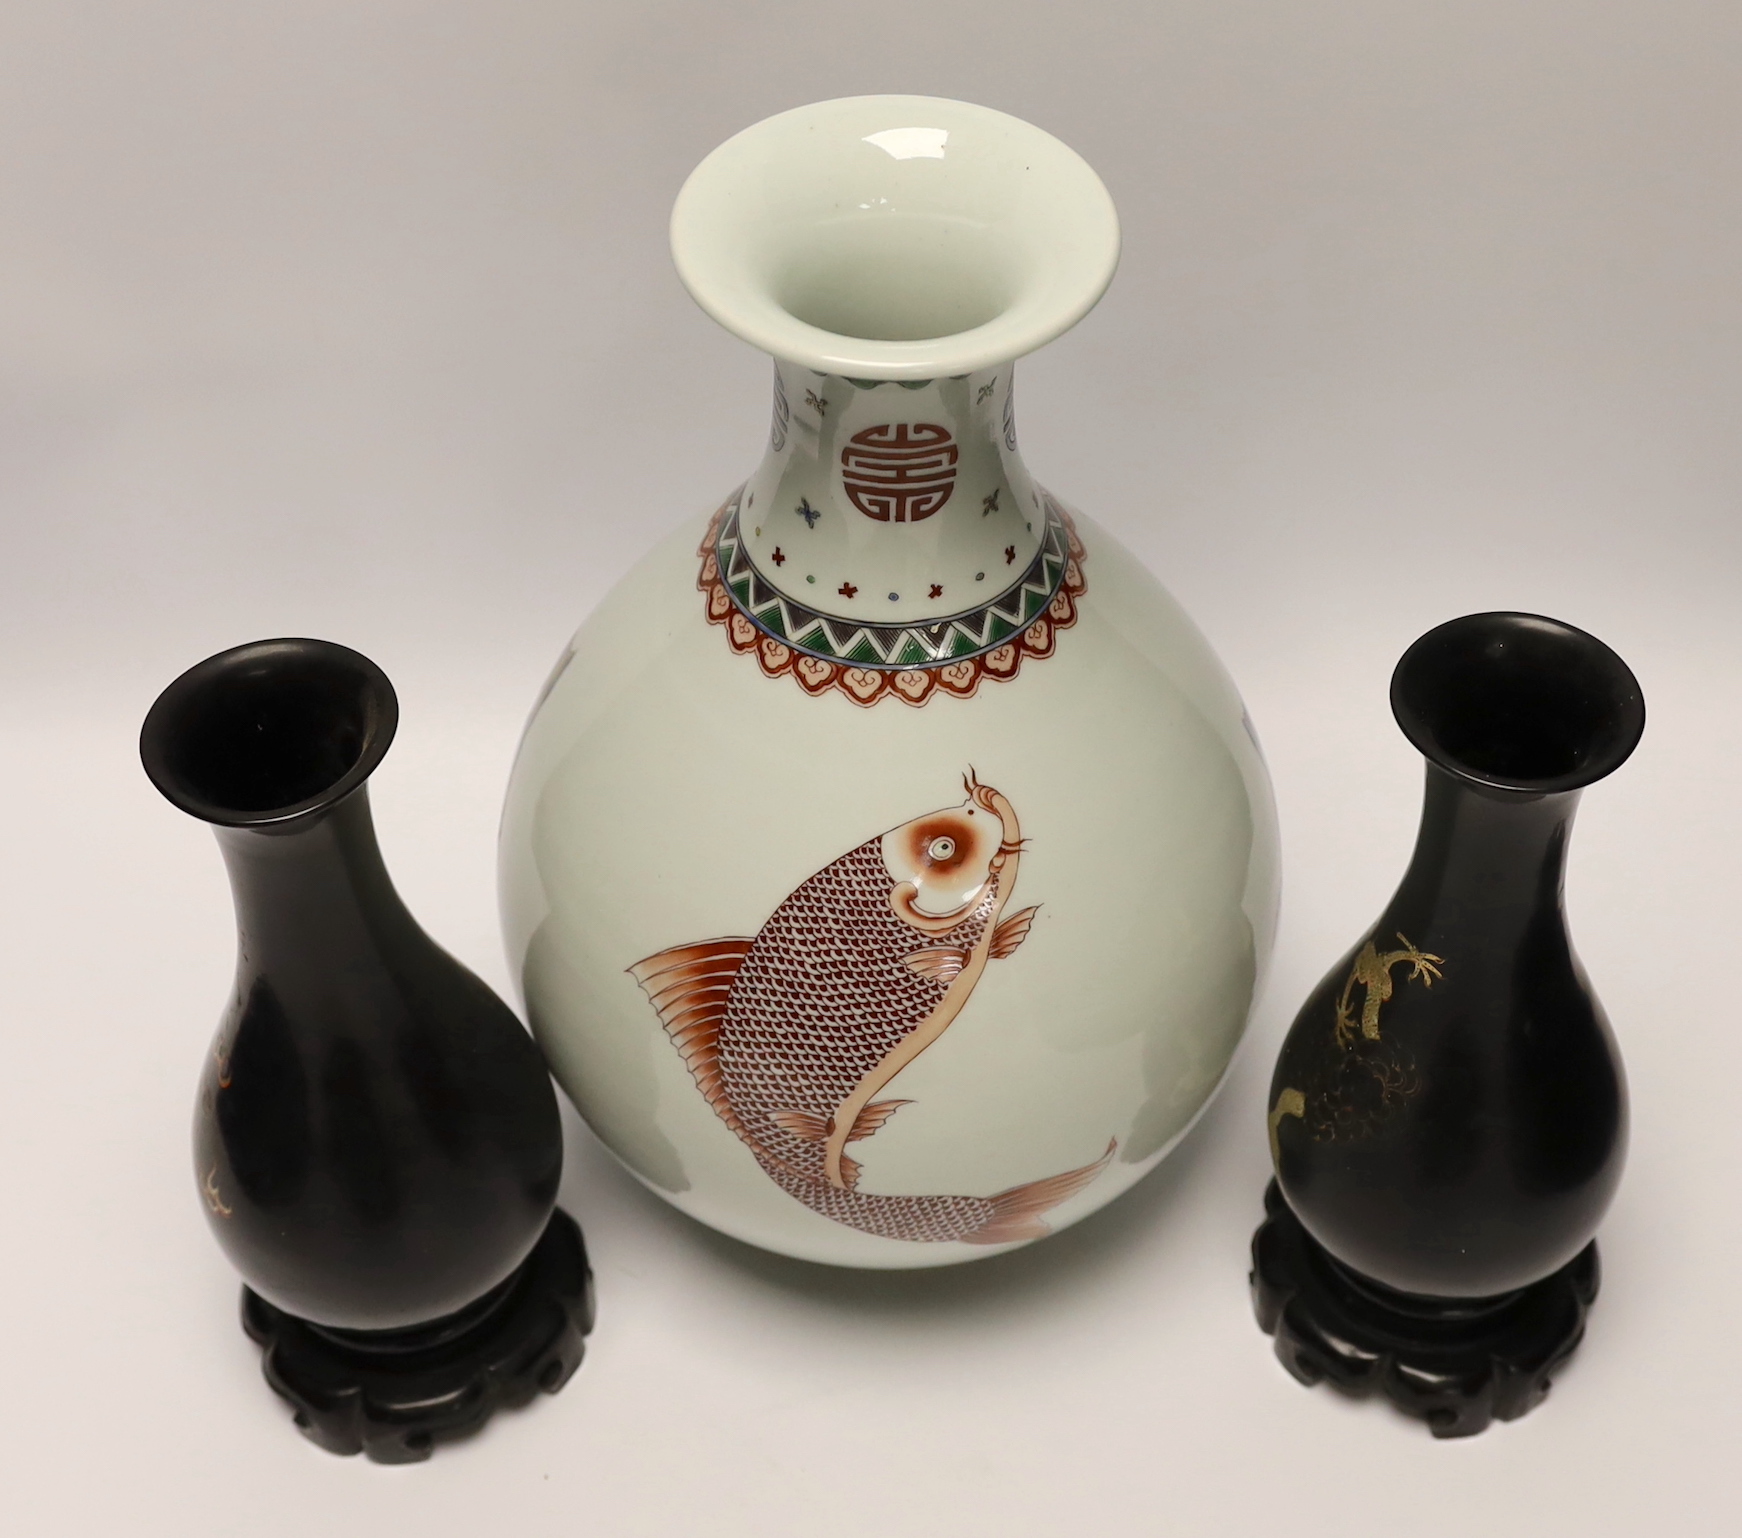 A Chinese porcelain ‘fish’ vase and a pair of Chinese lacquer vases on stands, tallest 33cm